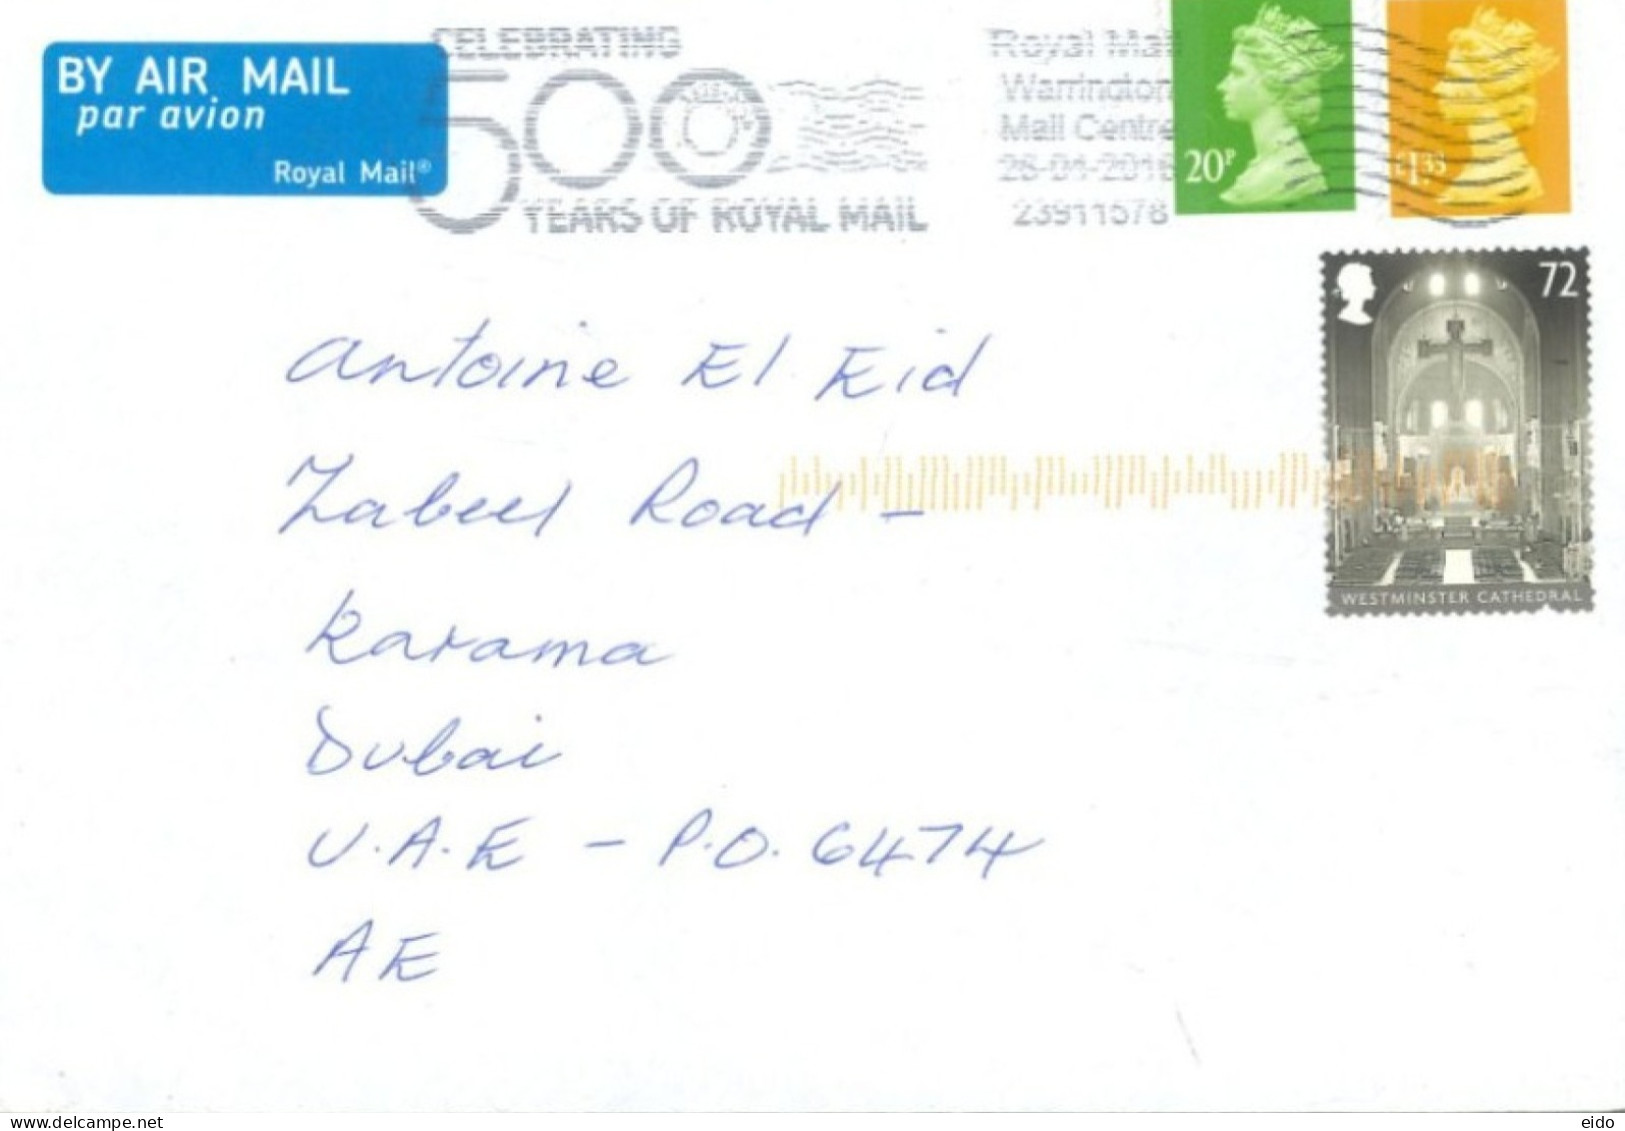 GREAT BRITAIN. - 2016, STAMPS COVER TO DUBAI. - Covers & Documents